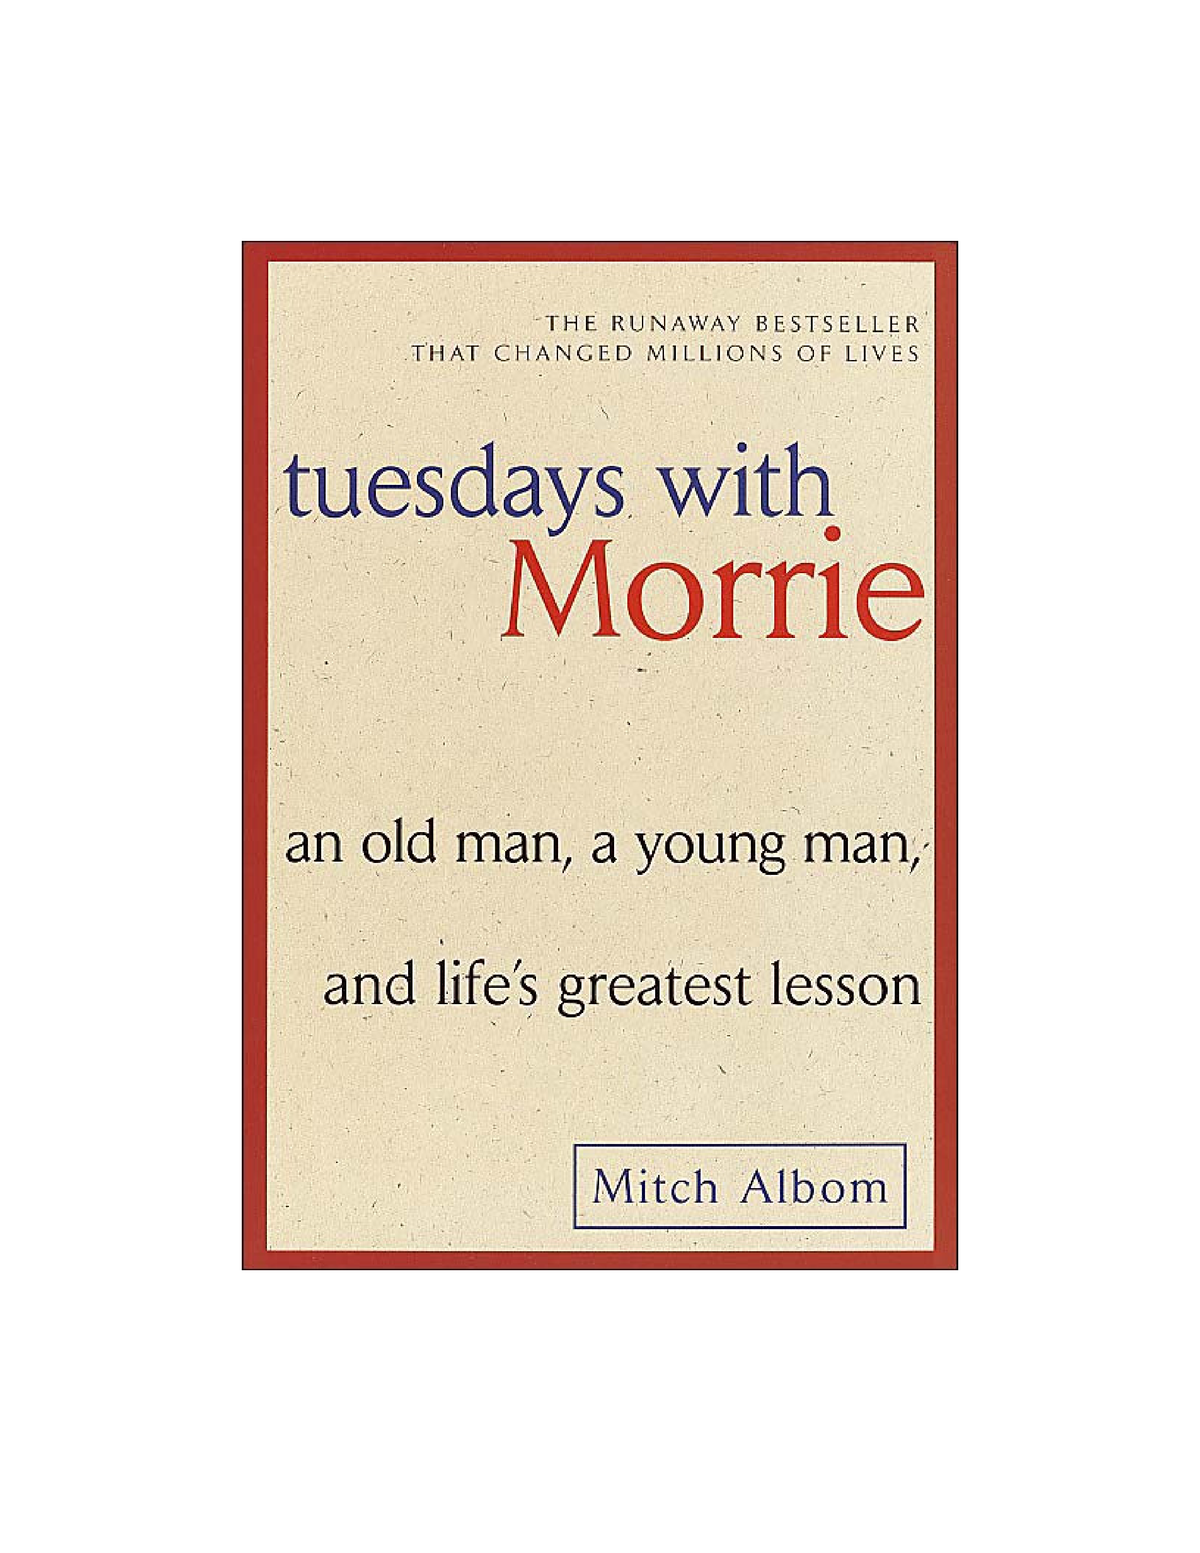 essay about tuesdays with morrie